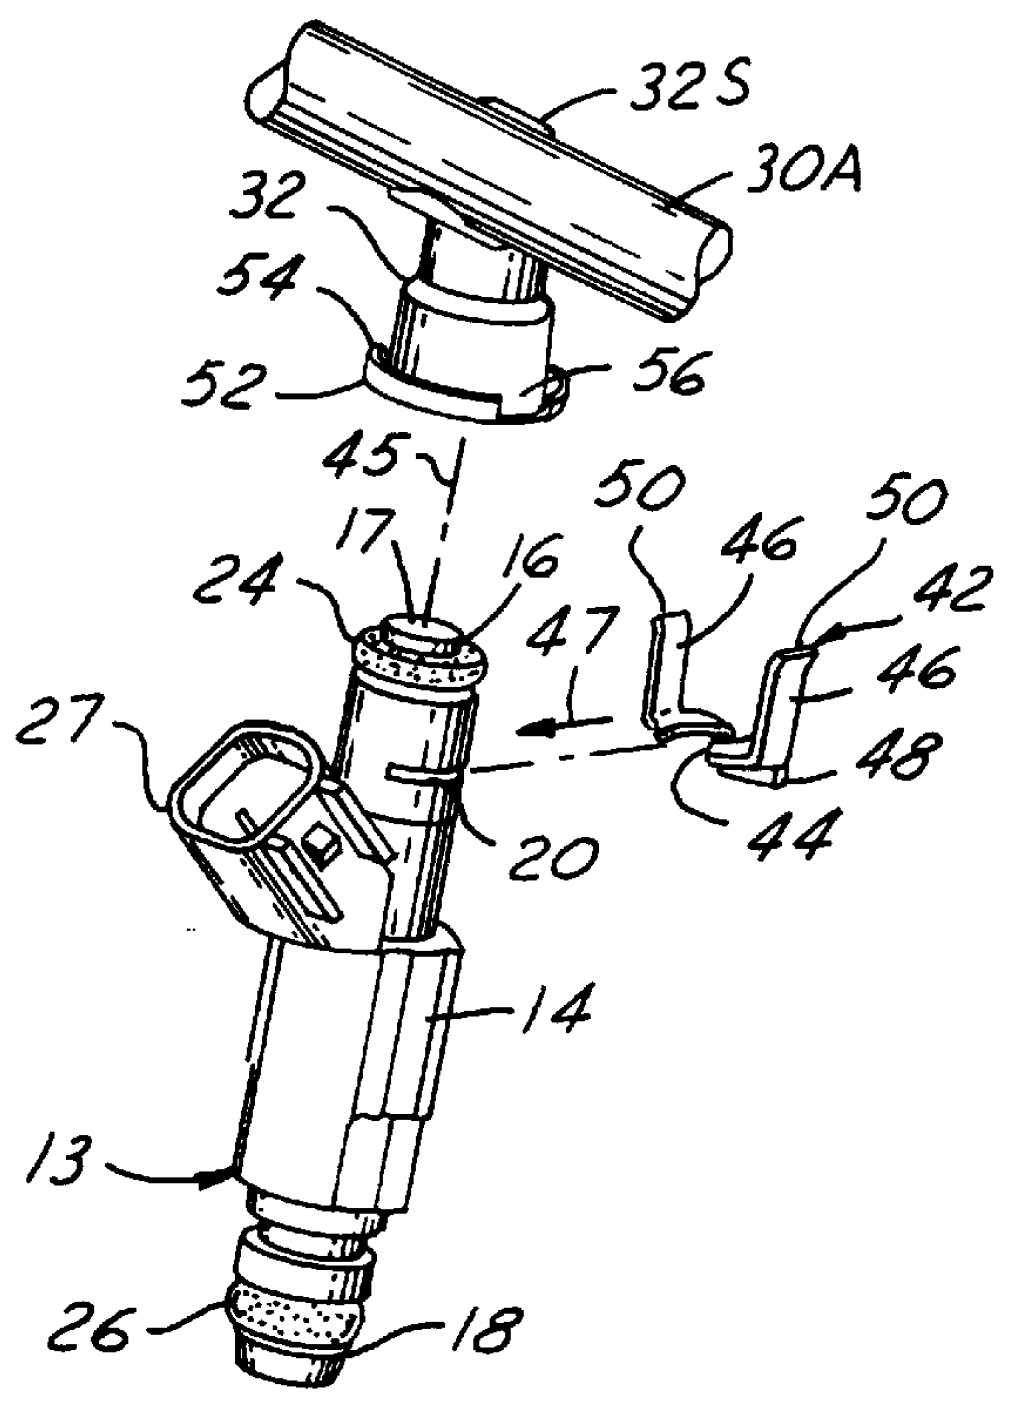 Arrangement for orienting a fuel injector to a fuel manifold cup